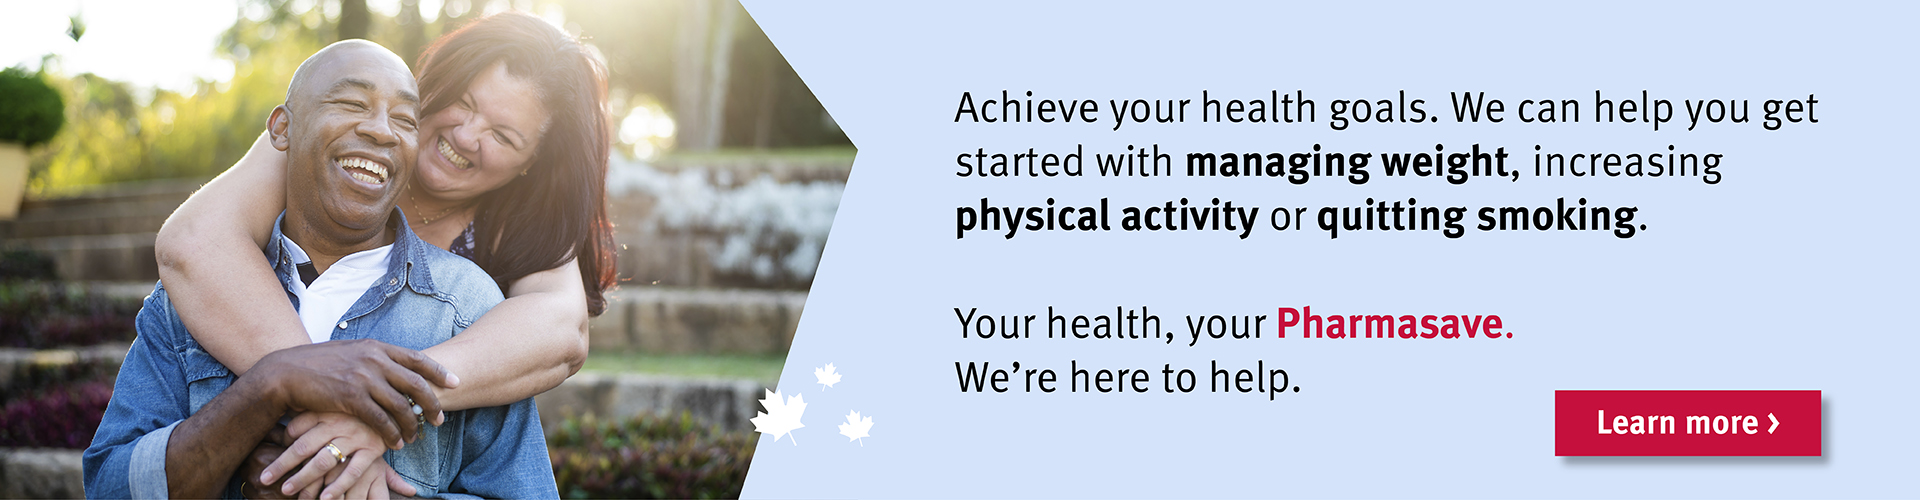 Achieve your health goals. Speak with your Pharmasave pharmacist.